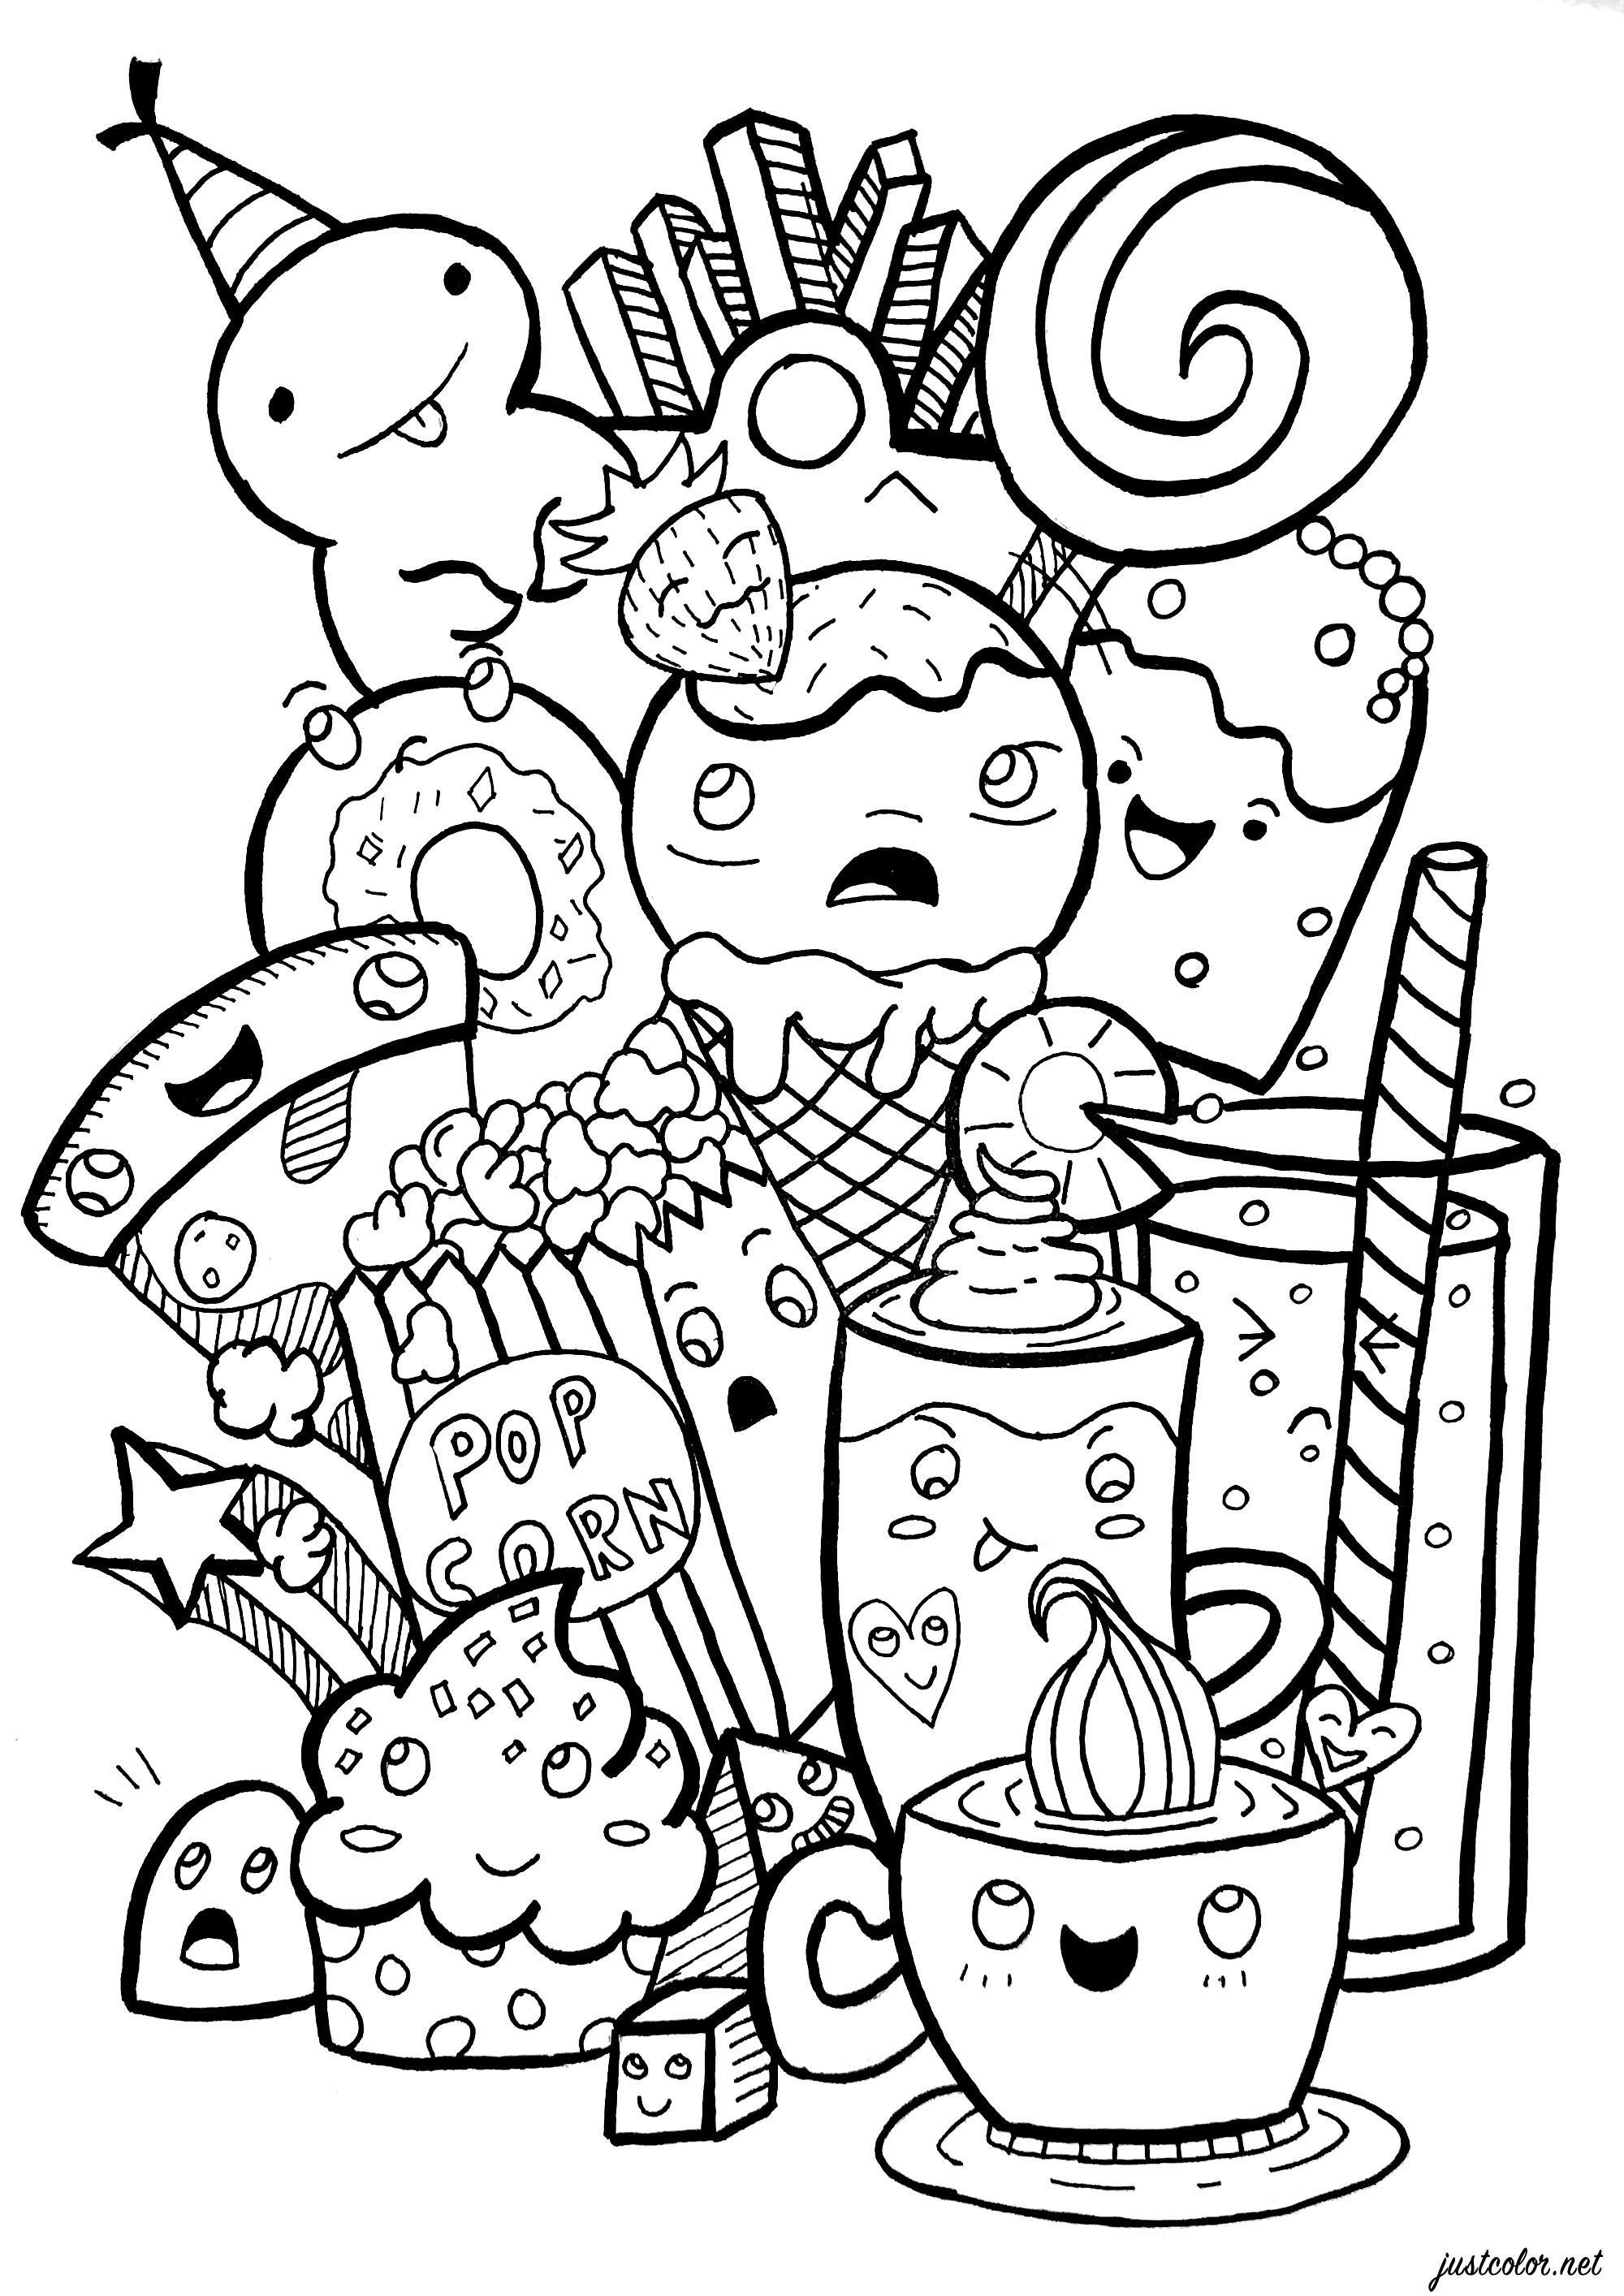 Easy Cute Food Coloring Pages - Cute Cupcakes Coloring Pages - Coloring